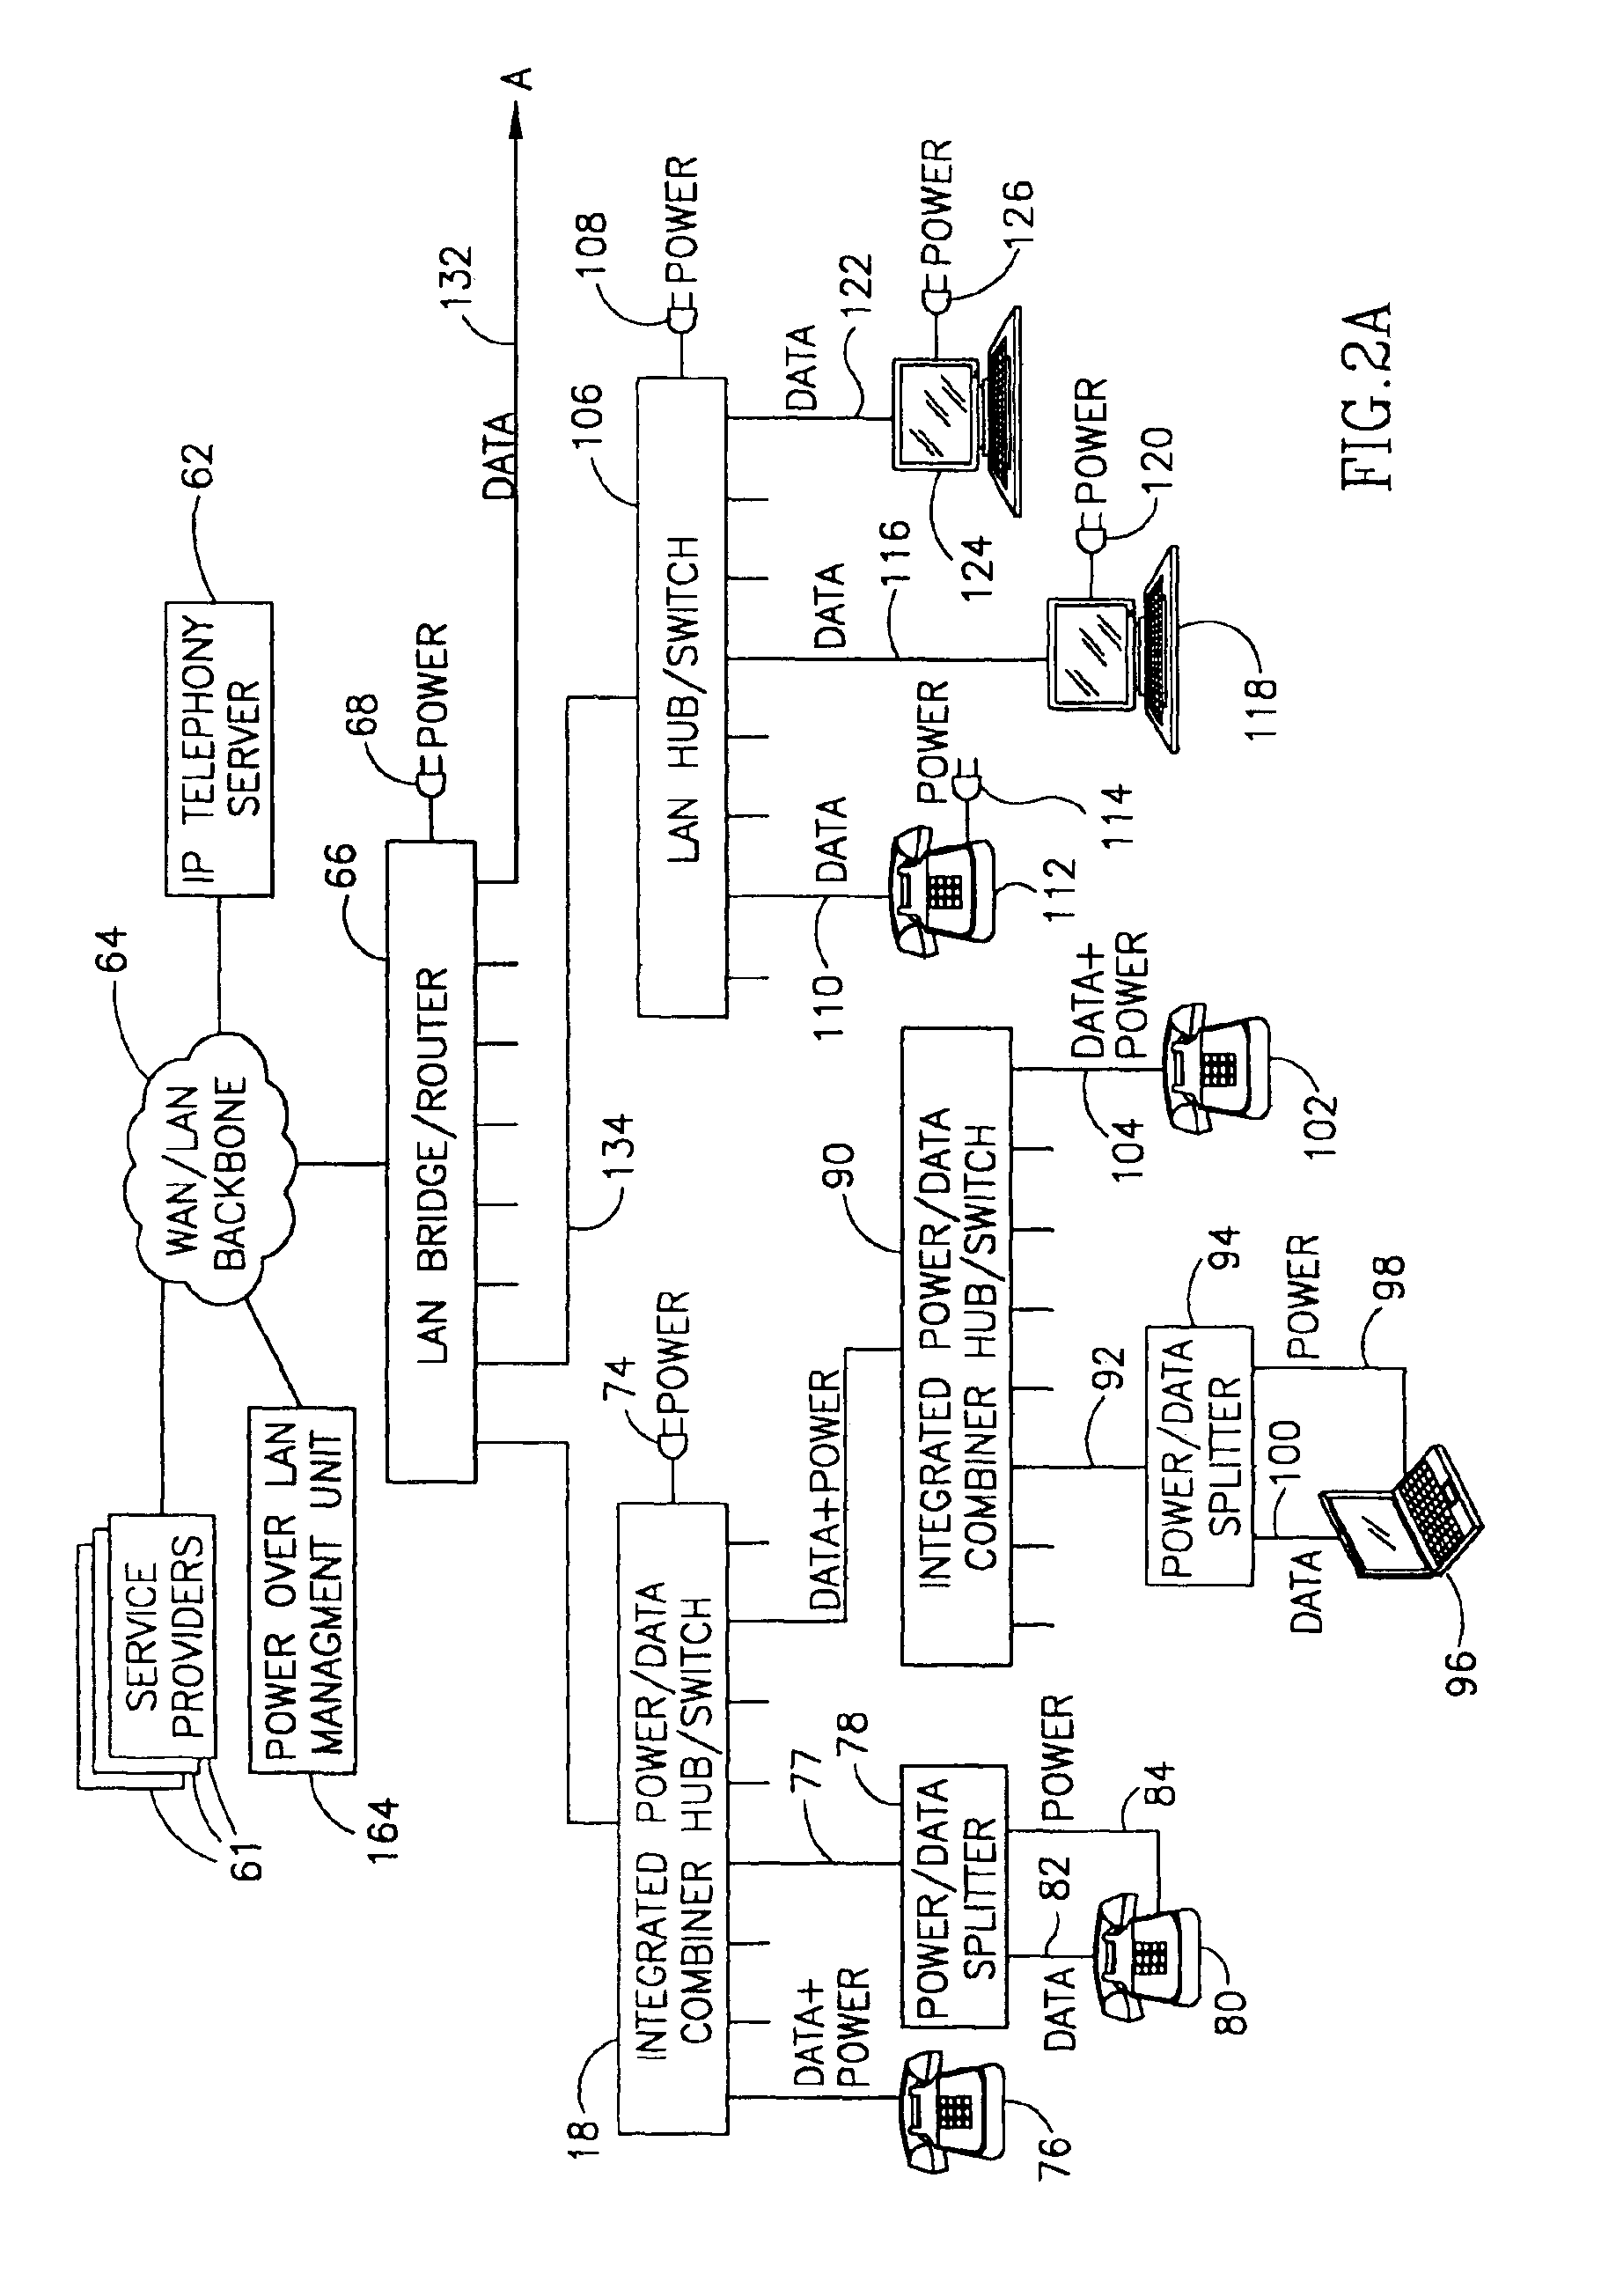 System for power delivery over data communication cabling infrastructure